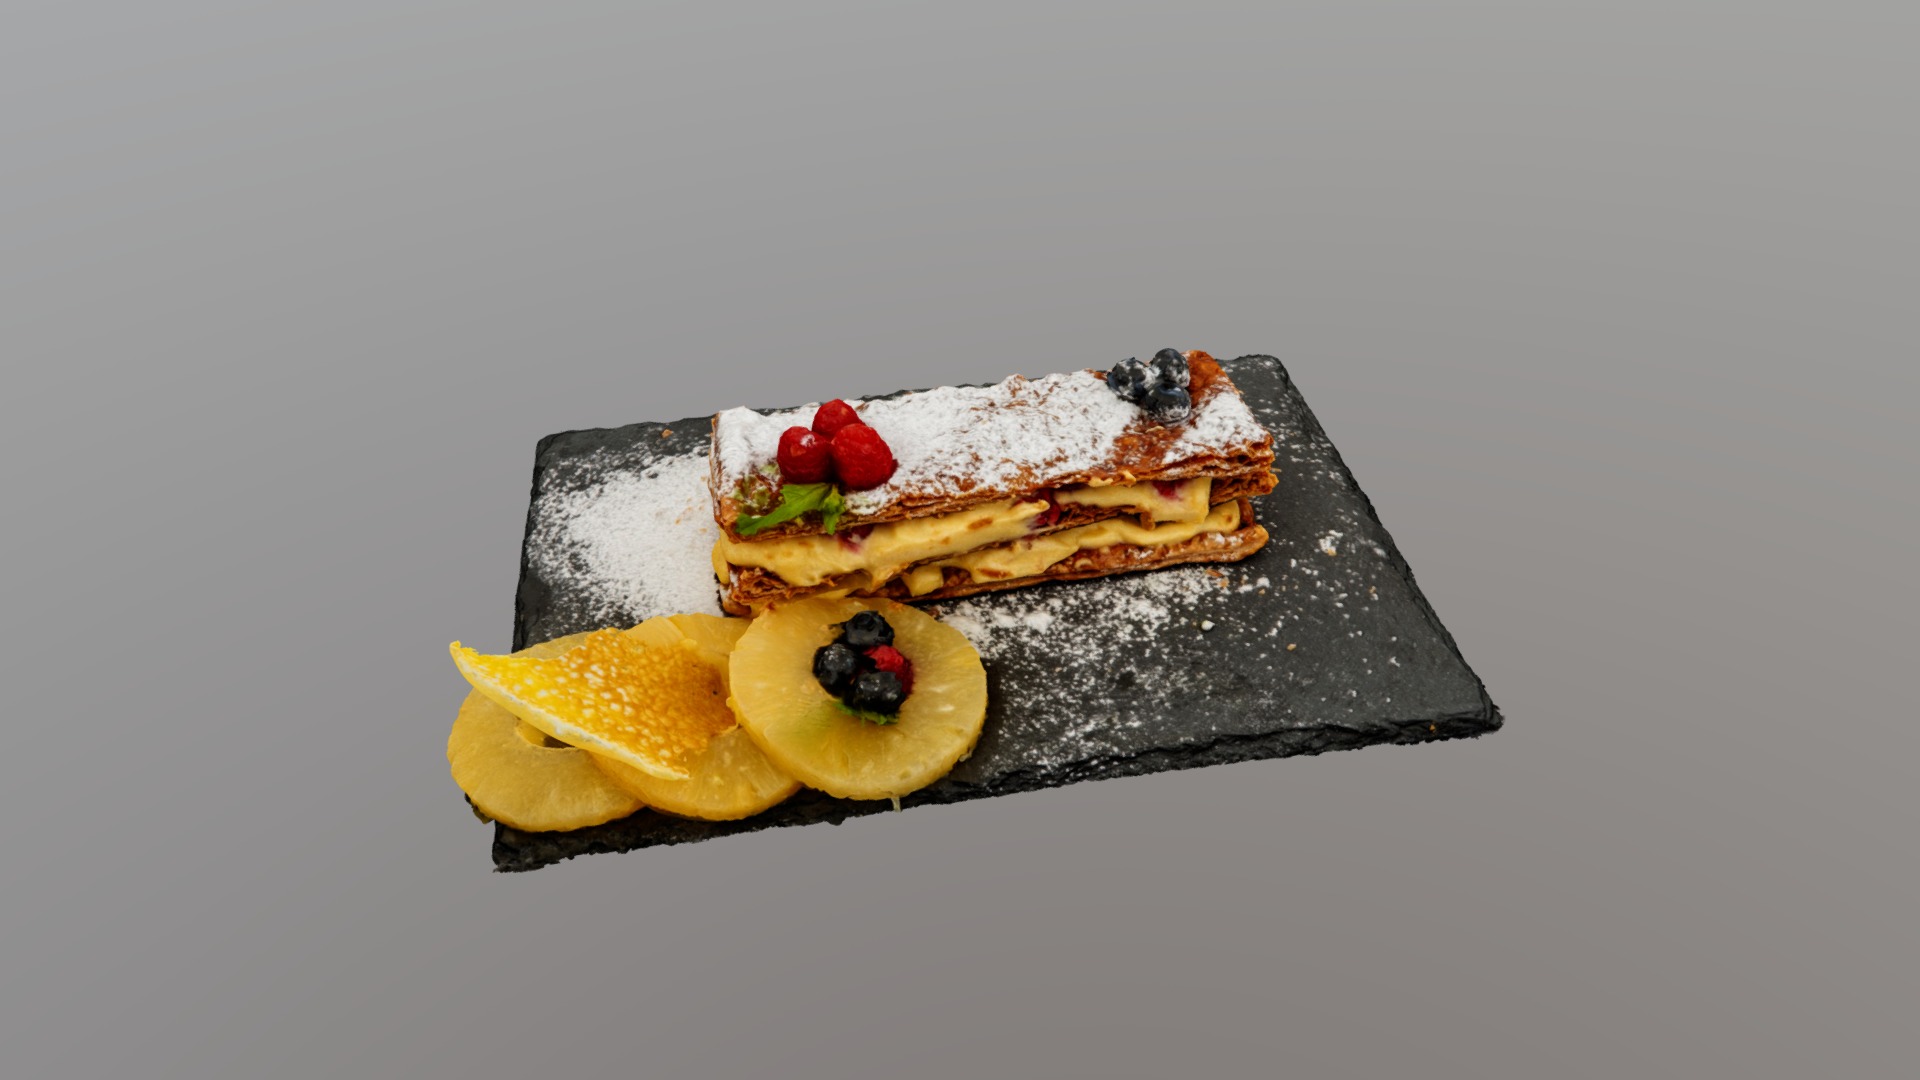 3D model Millefoglie - This is a 3D model of the Millefoglie. The 3D model is about a sandwich with fruit on a black plate.